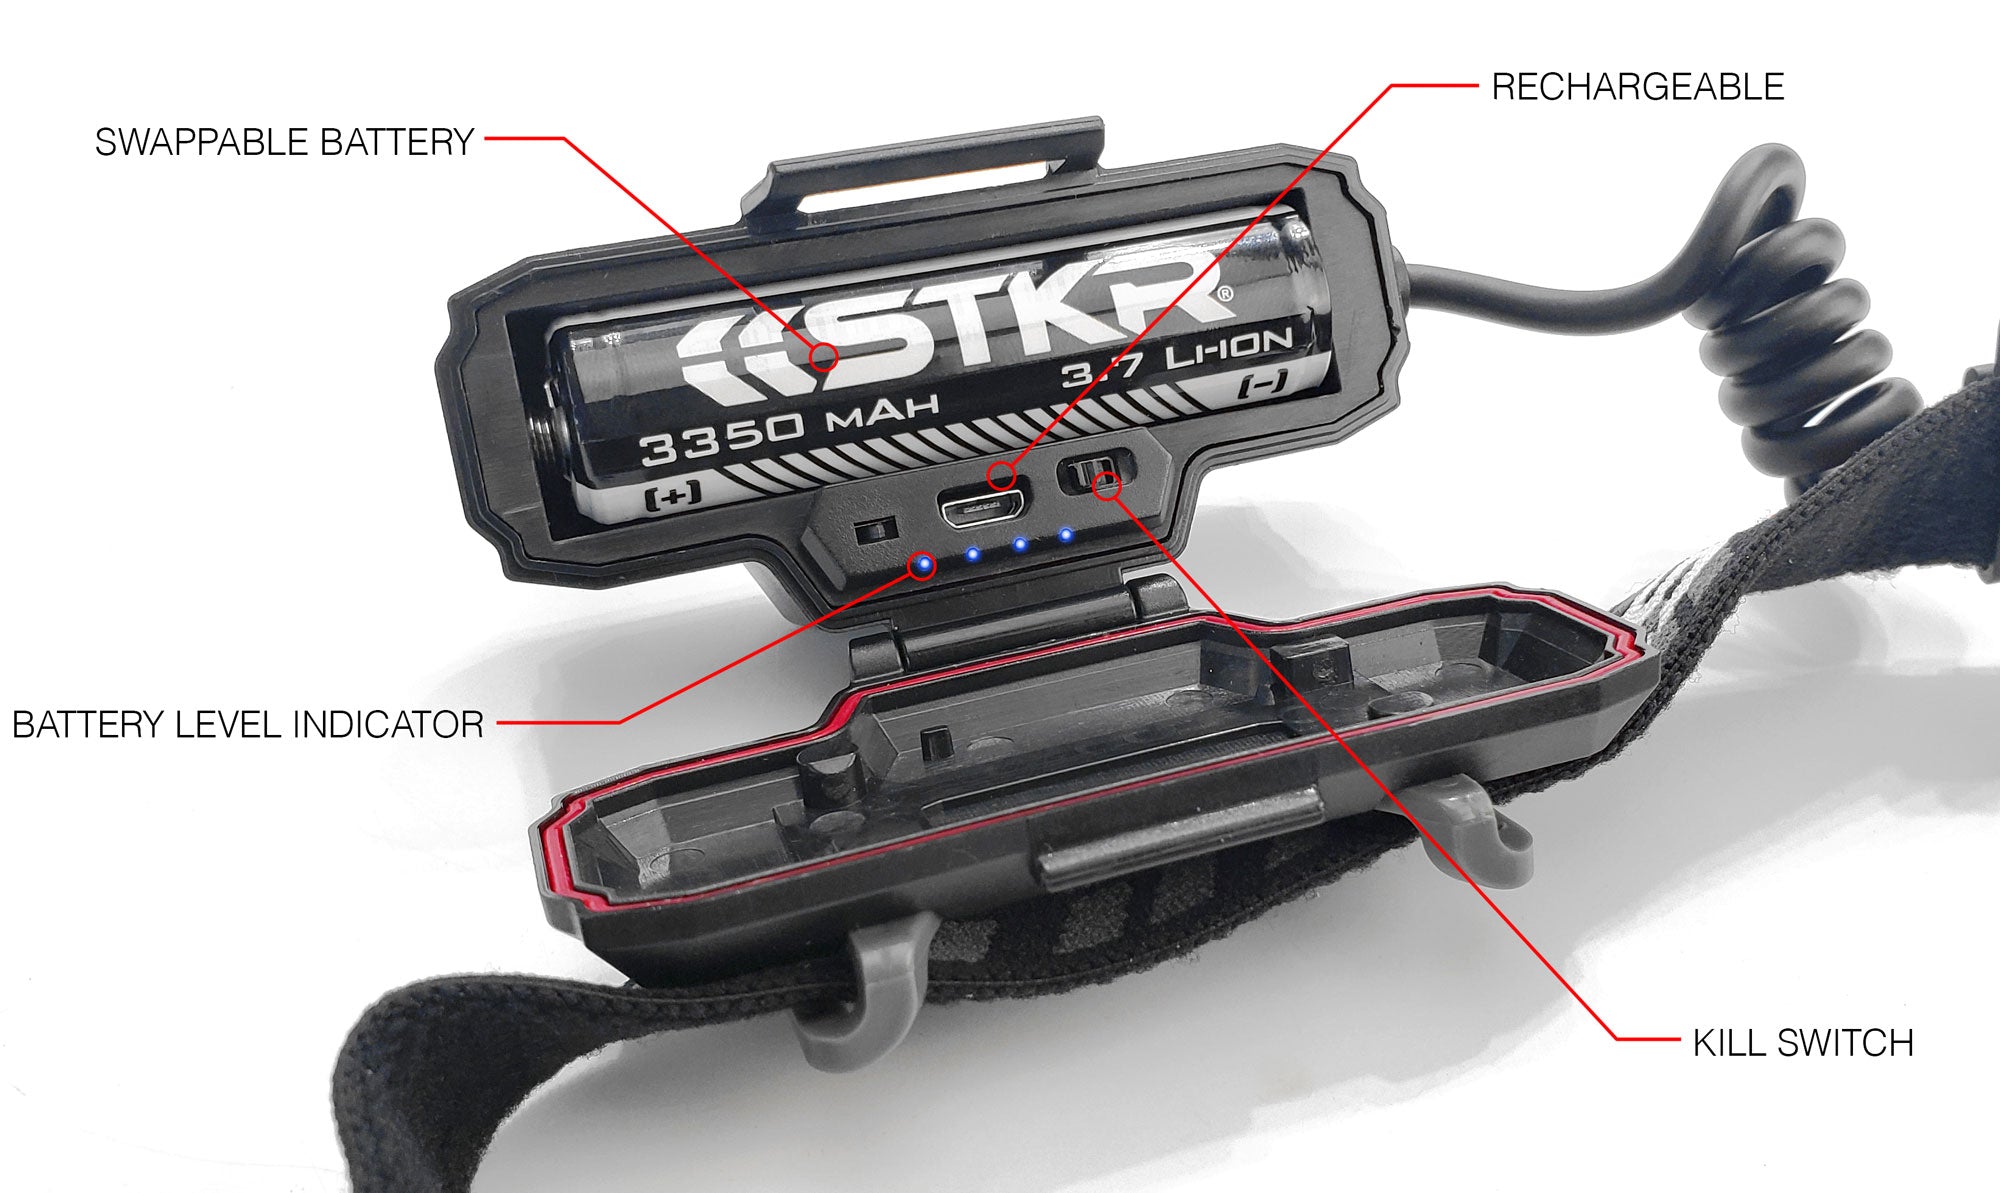 FLEXIT Headlamp PRO battery management callout poster. Features text include: Swappable battery, Battery level indicator, Rechargeable, and Kill switch. | STKR Concepts - striker